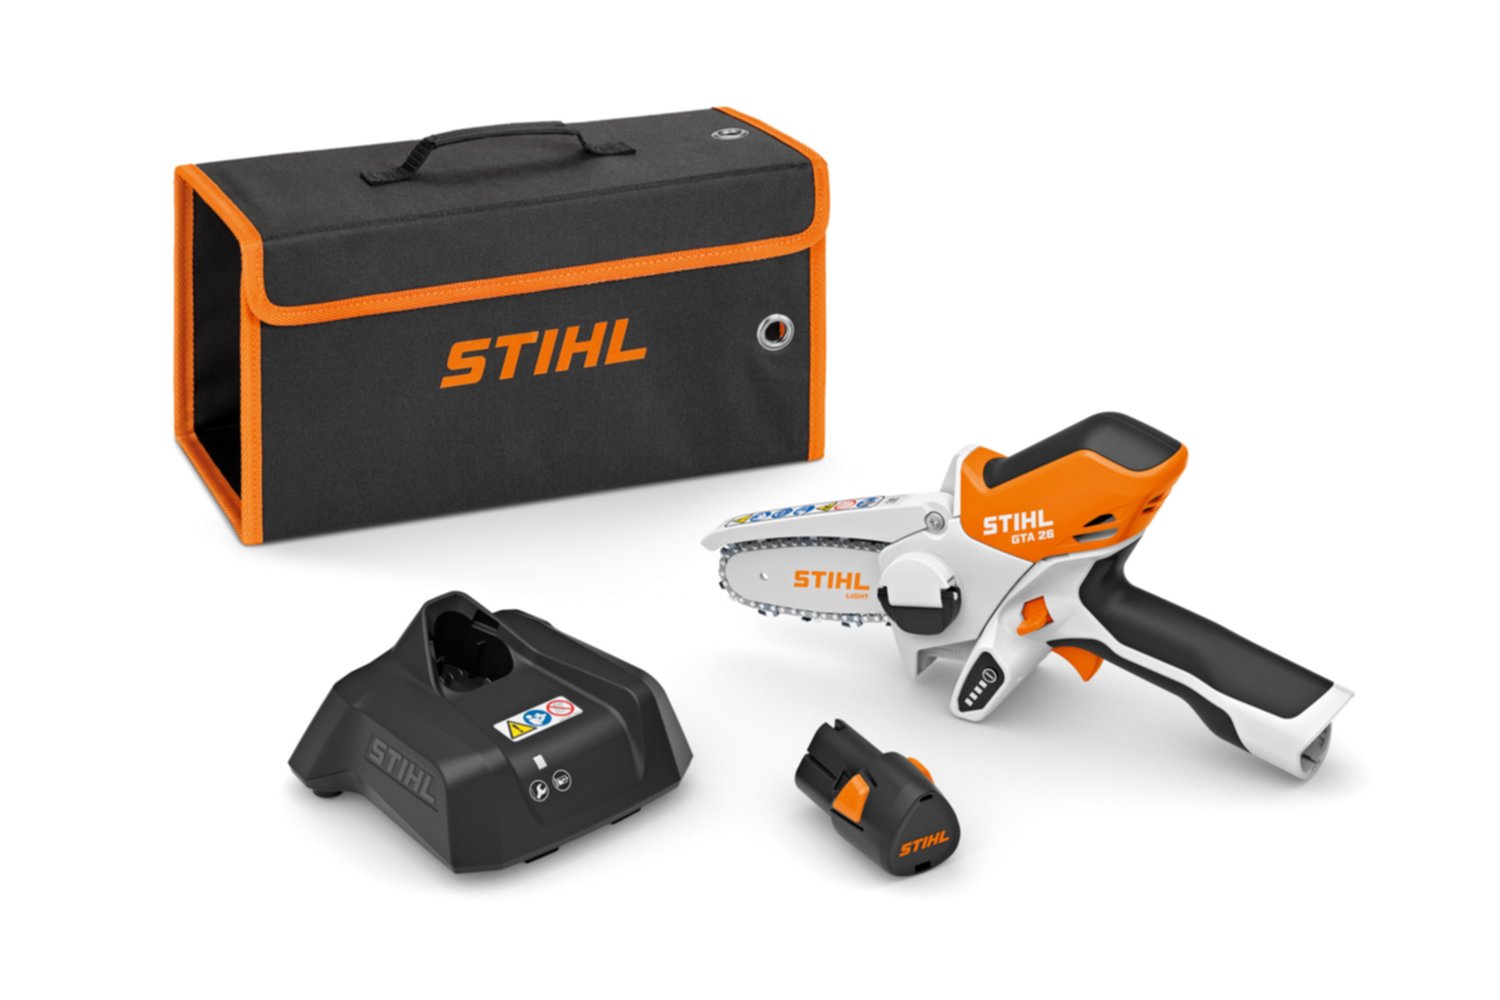 Stihl 026, Outils - Divers, LaSalle